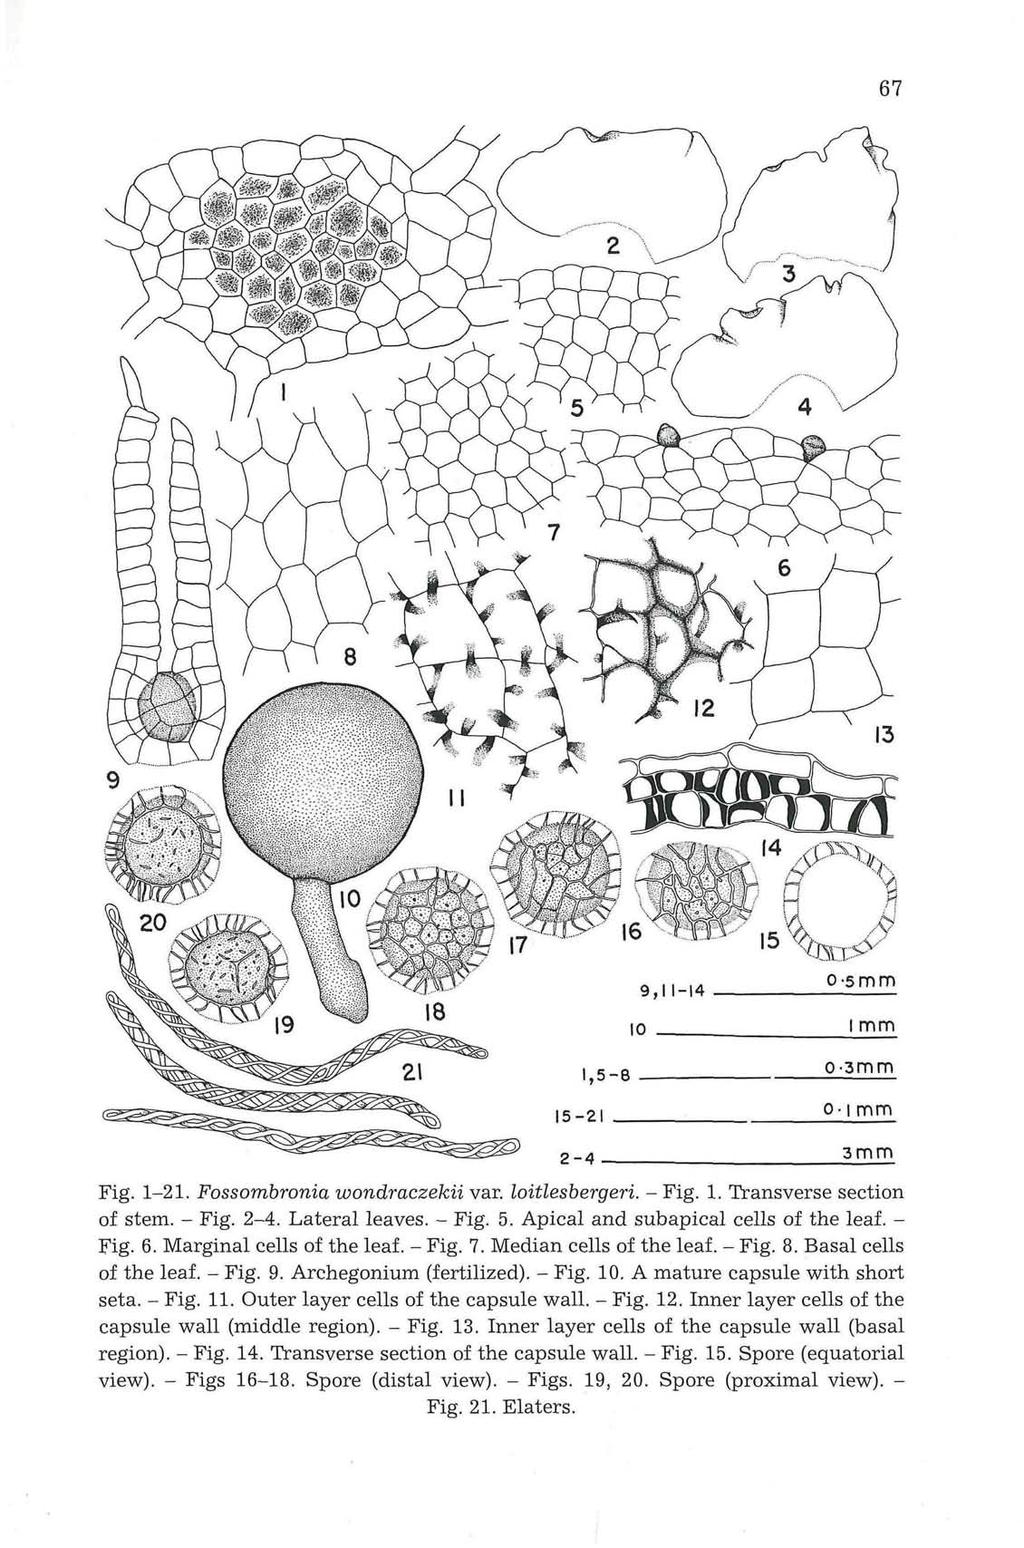 67 Fig. 1-21. Fossombronia wondraczekii var. loitlesbergeri. - Fig. 1. Transverse section of stem. - Fig. 2-4. Lateral leaves. - Fig. 5. Apical and subapical cells of the leaf. - Fig. 6.